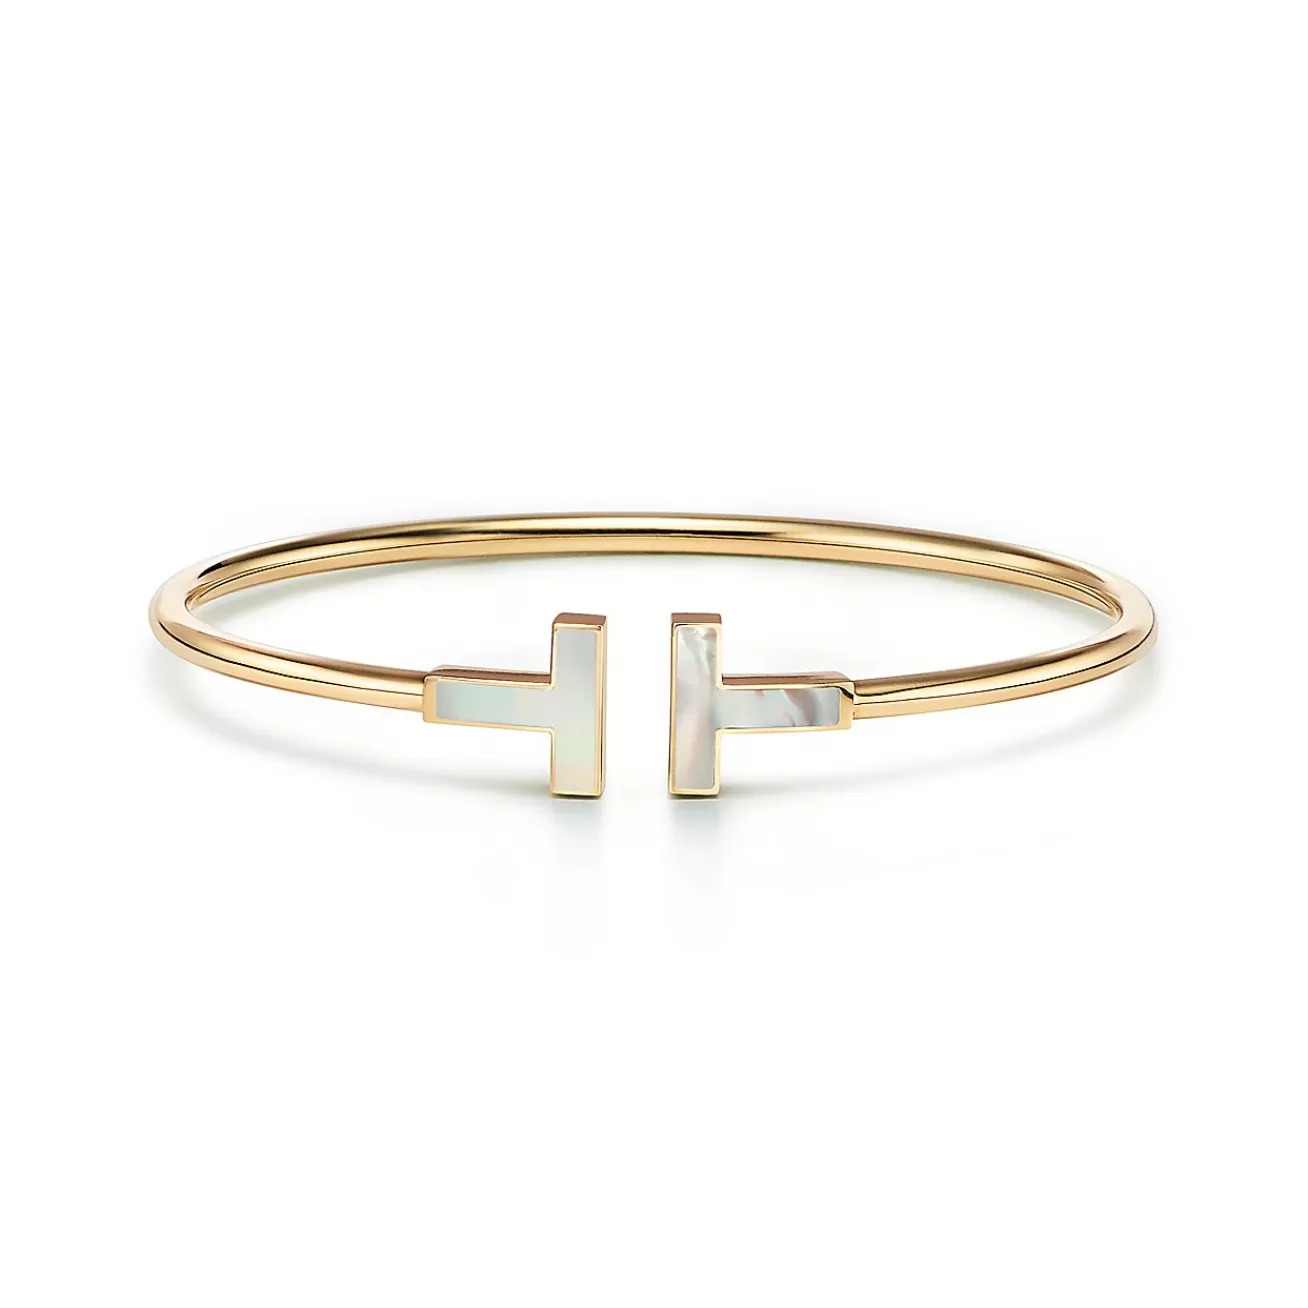 Tiffany & Co. Tiffany T Wire Bracelet in Yellow Gold with Mother-of-pearl | ^ Bracelets | Gold Jewelry